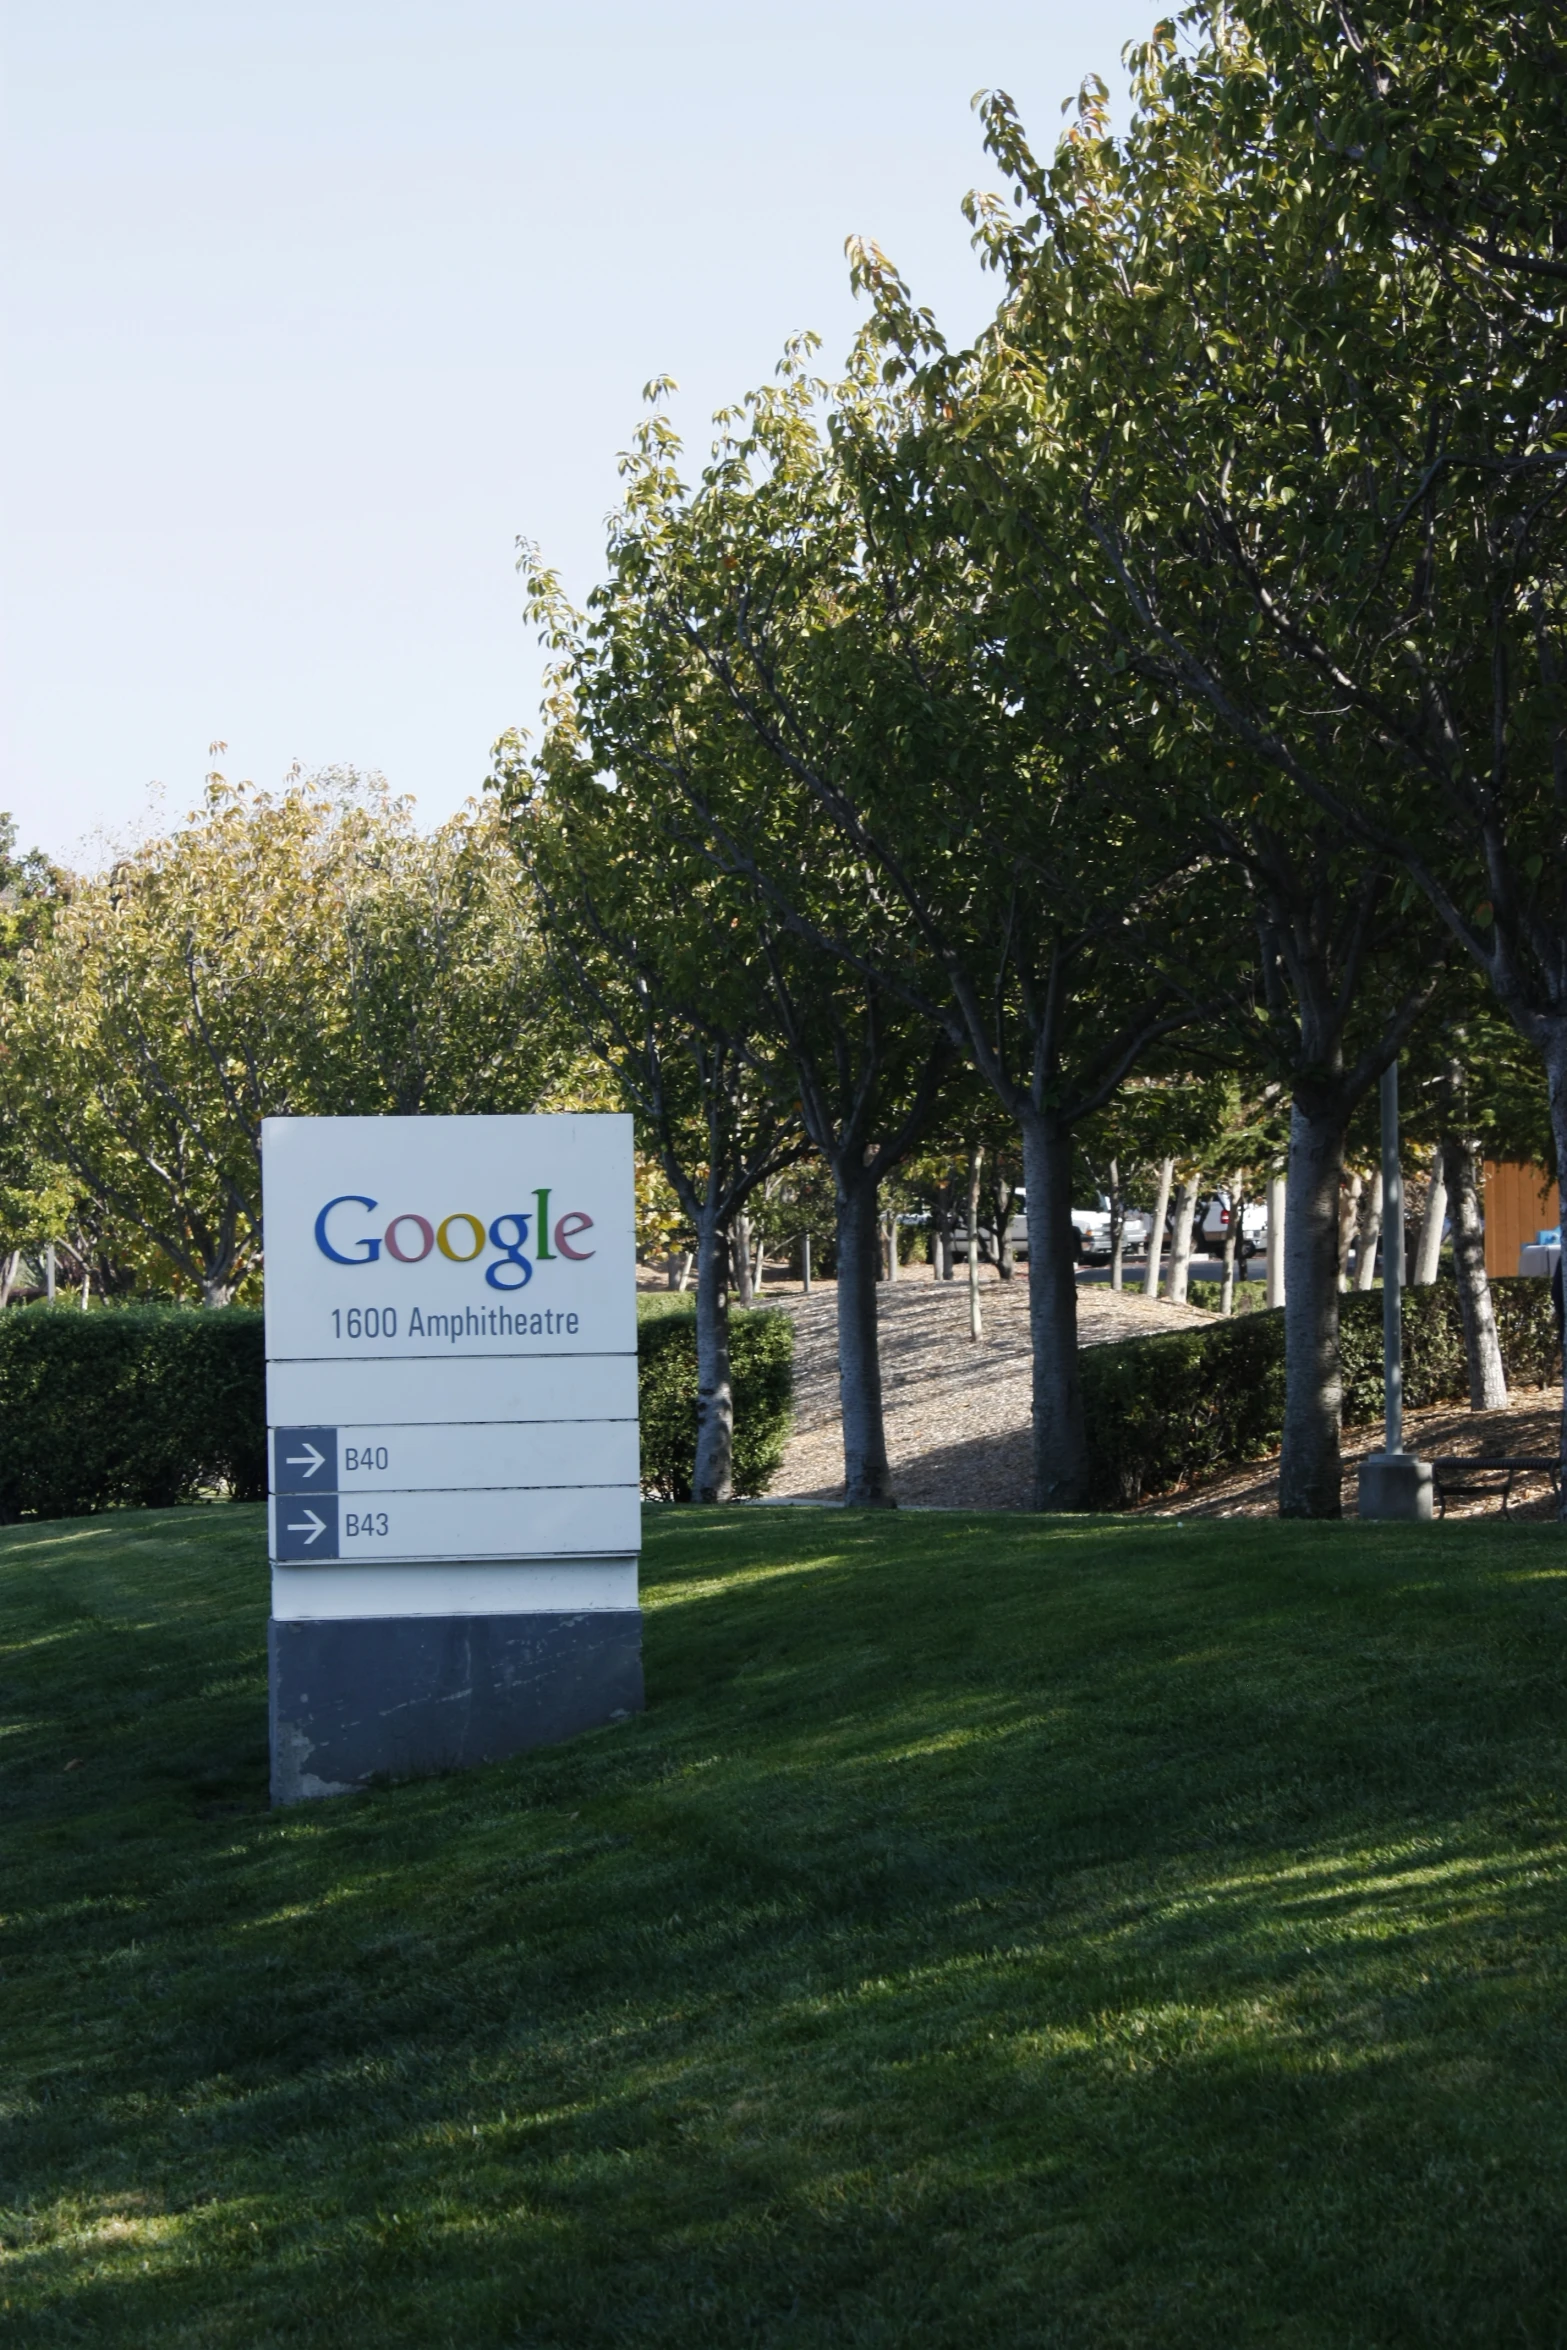 a google sign stands on some grass near trees